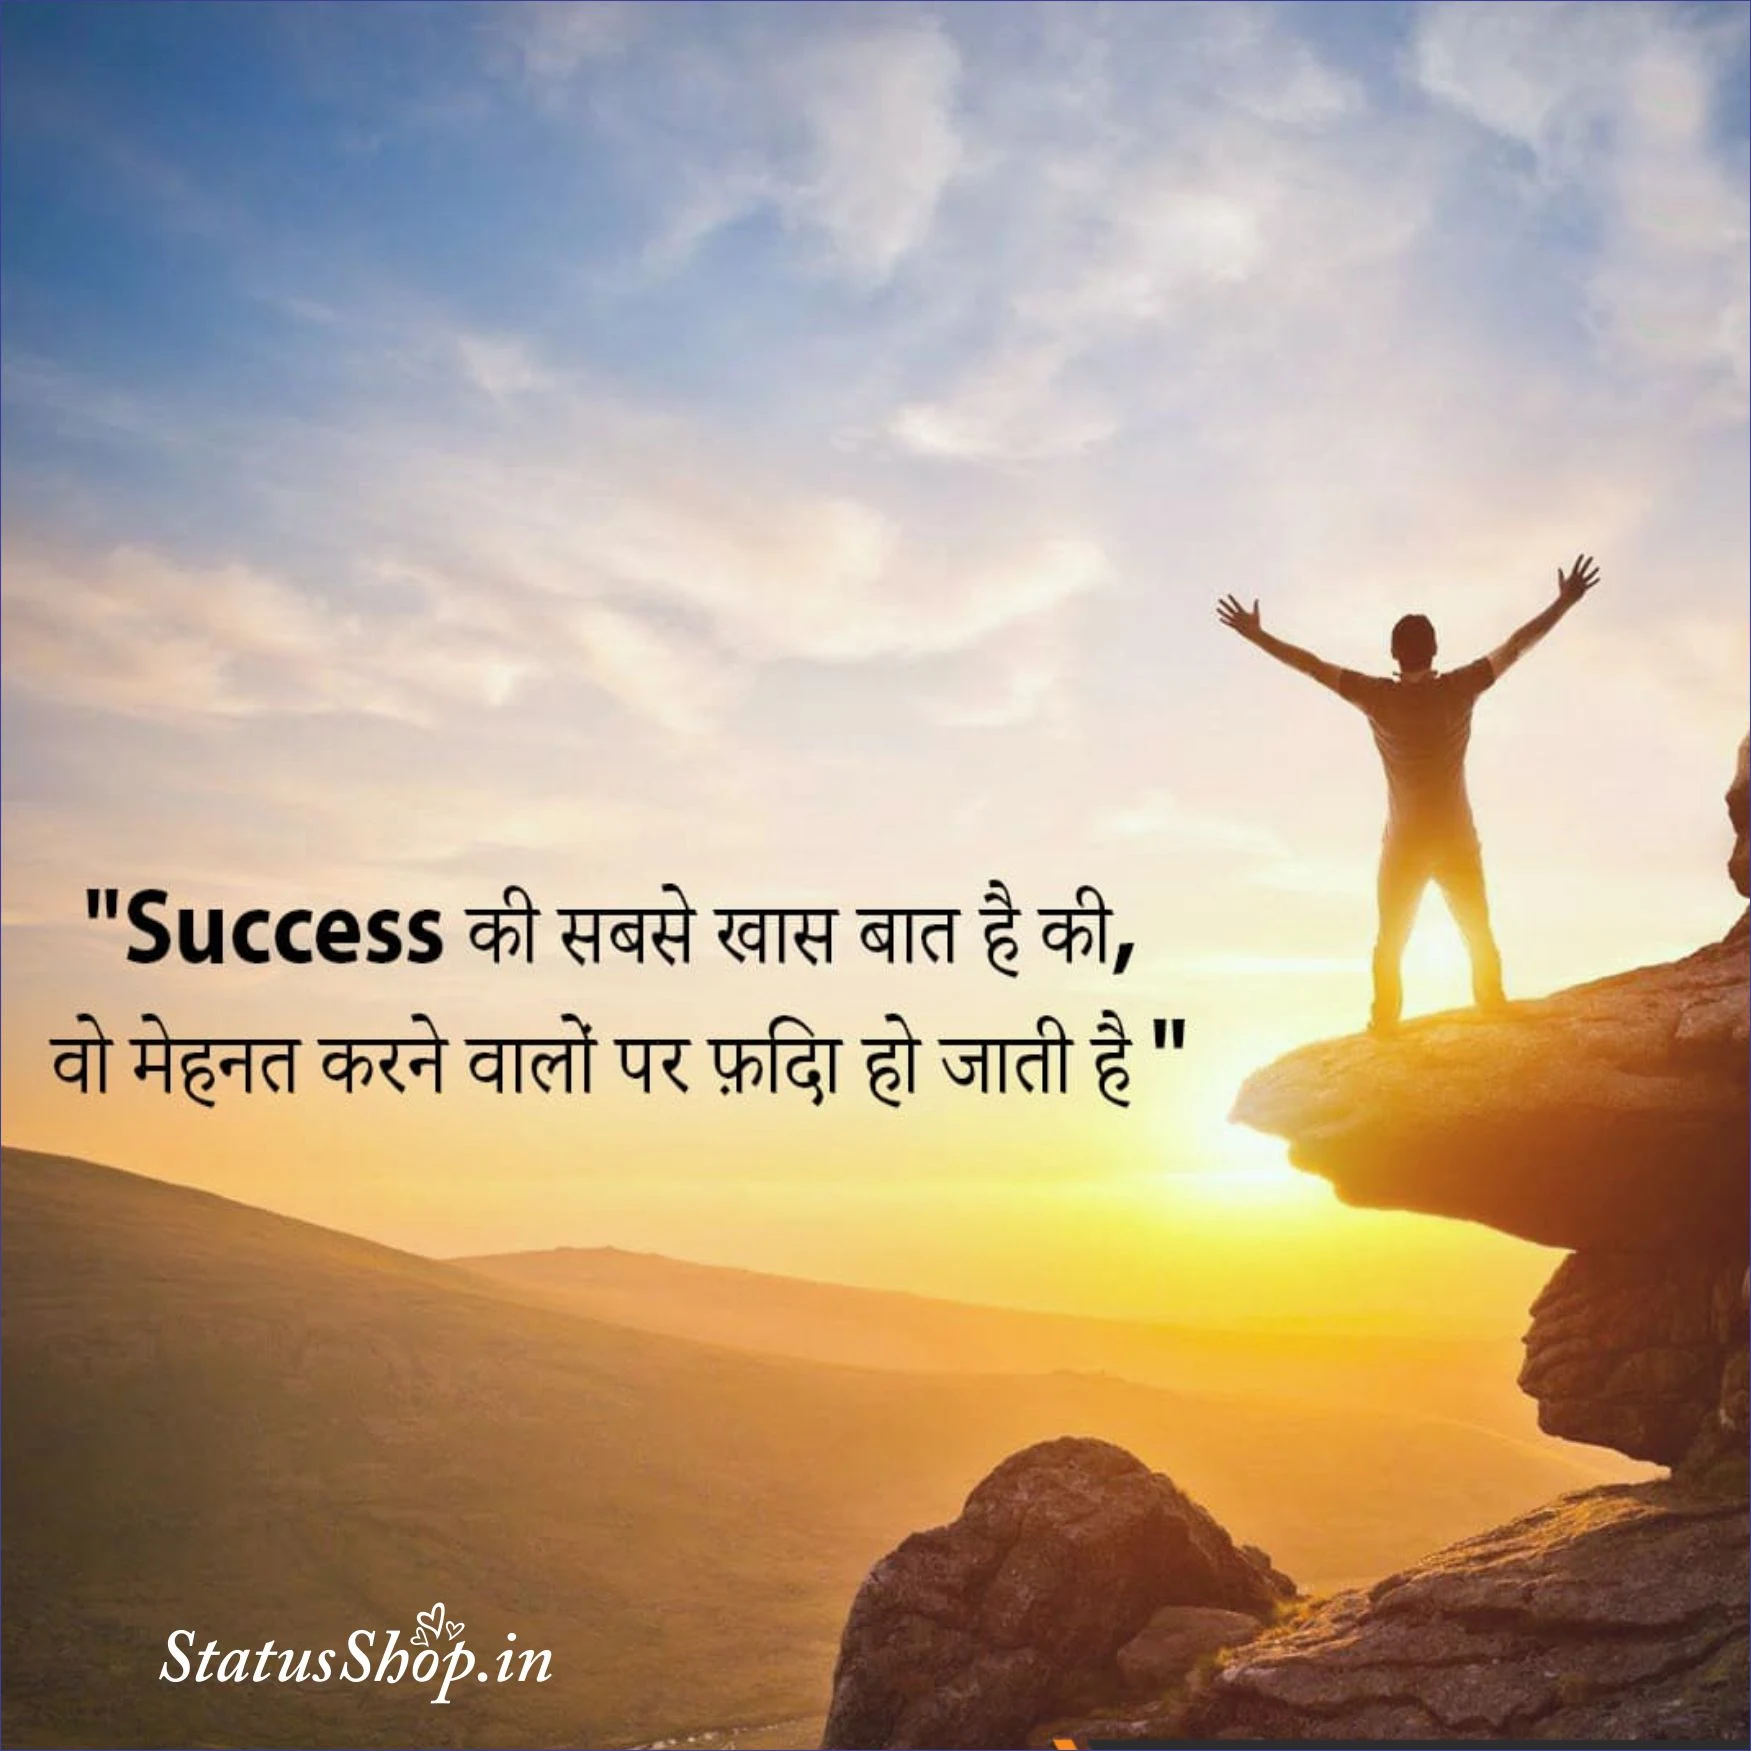 Motivational-Quotes-In-Hindi-For-Success